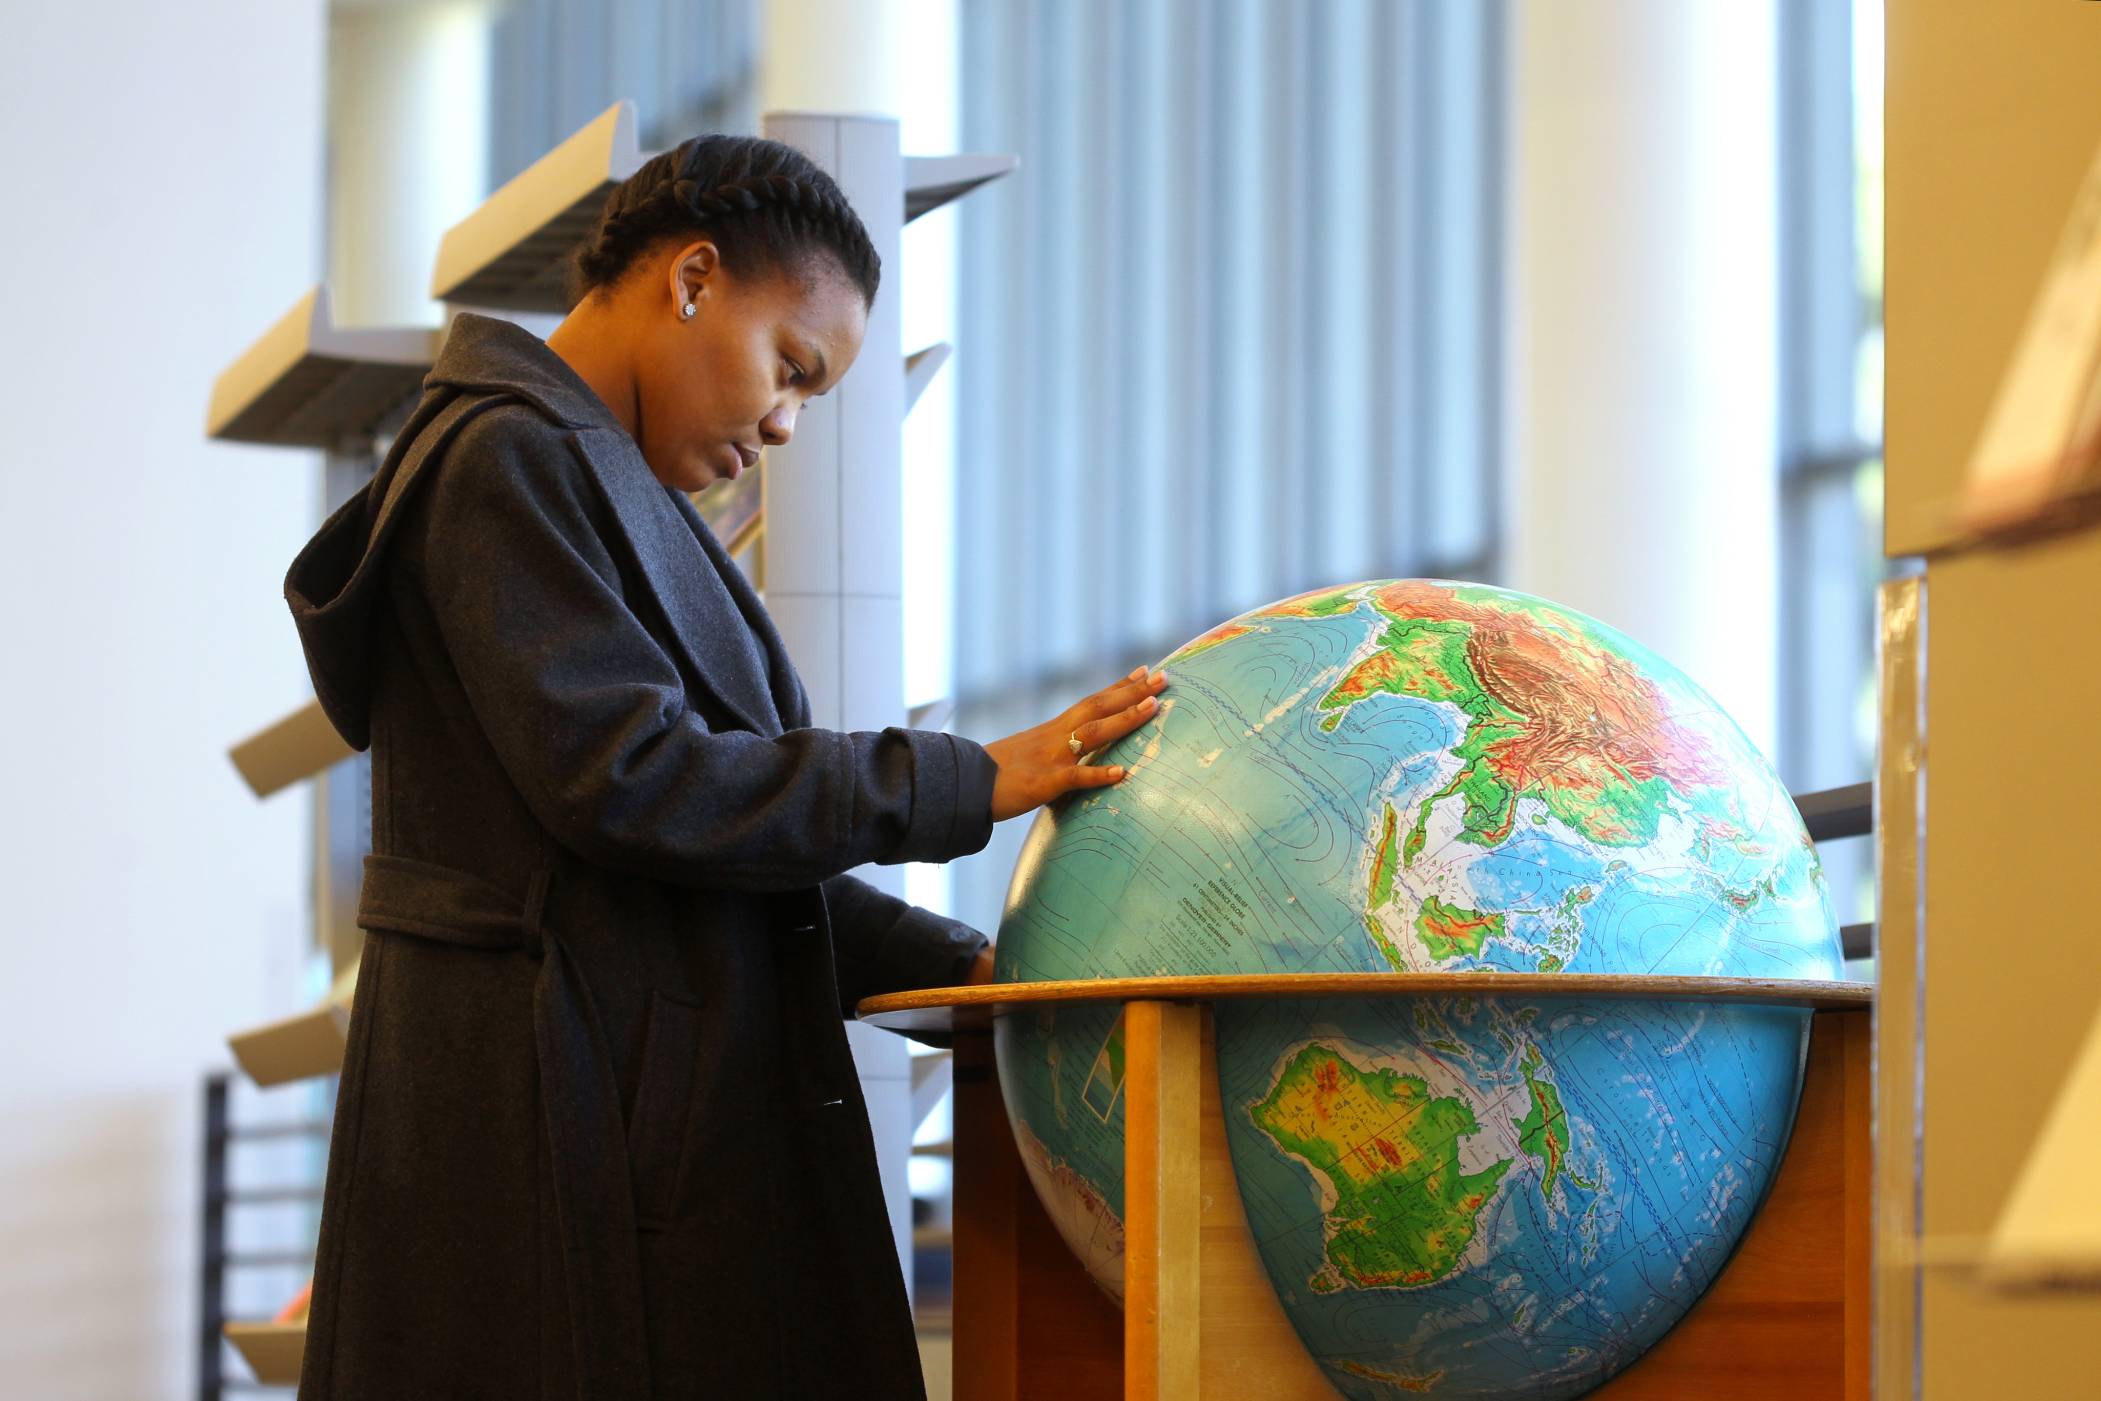 A woman touches a large and colorful globe to admire the map.